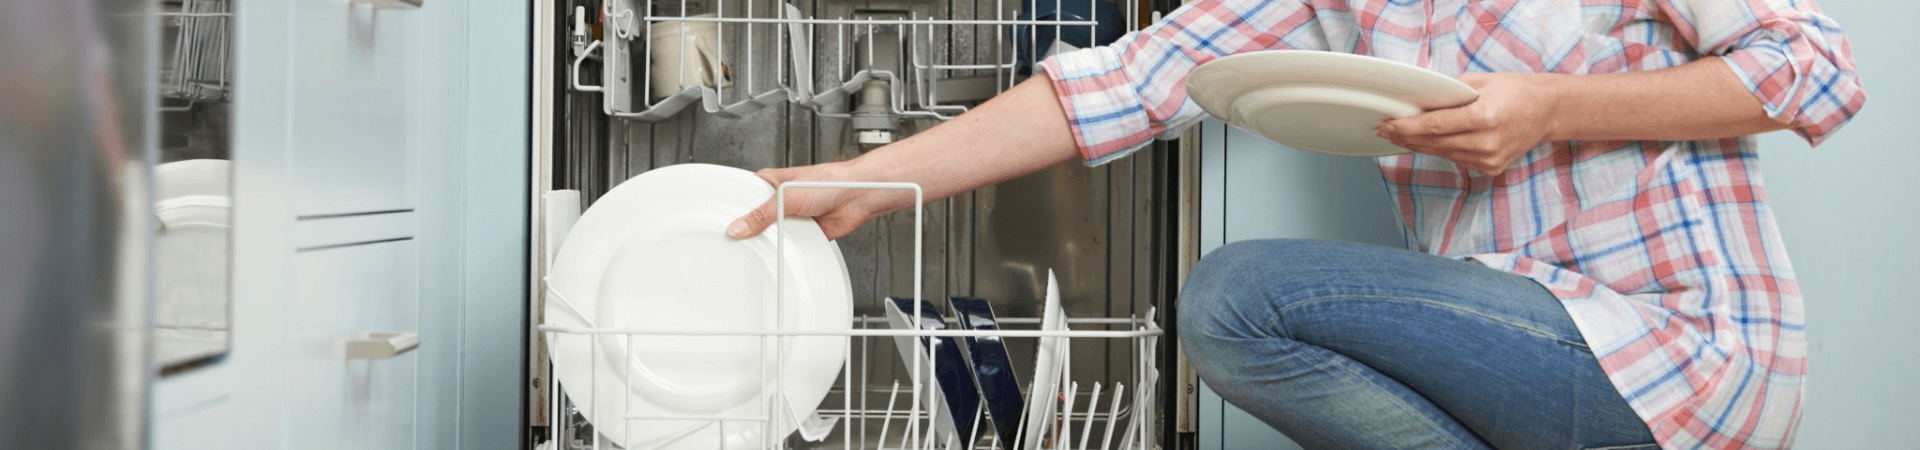 The Dumbest Thing You’re Doing to Your Dishwasher